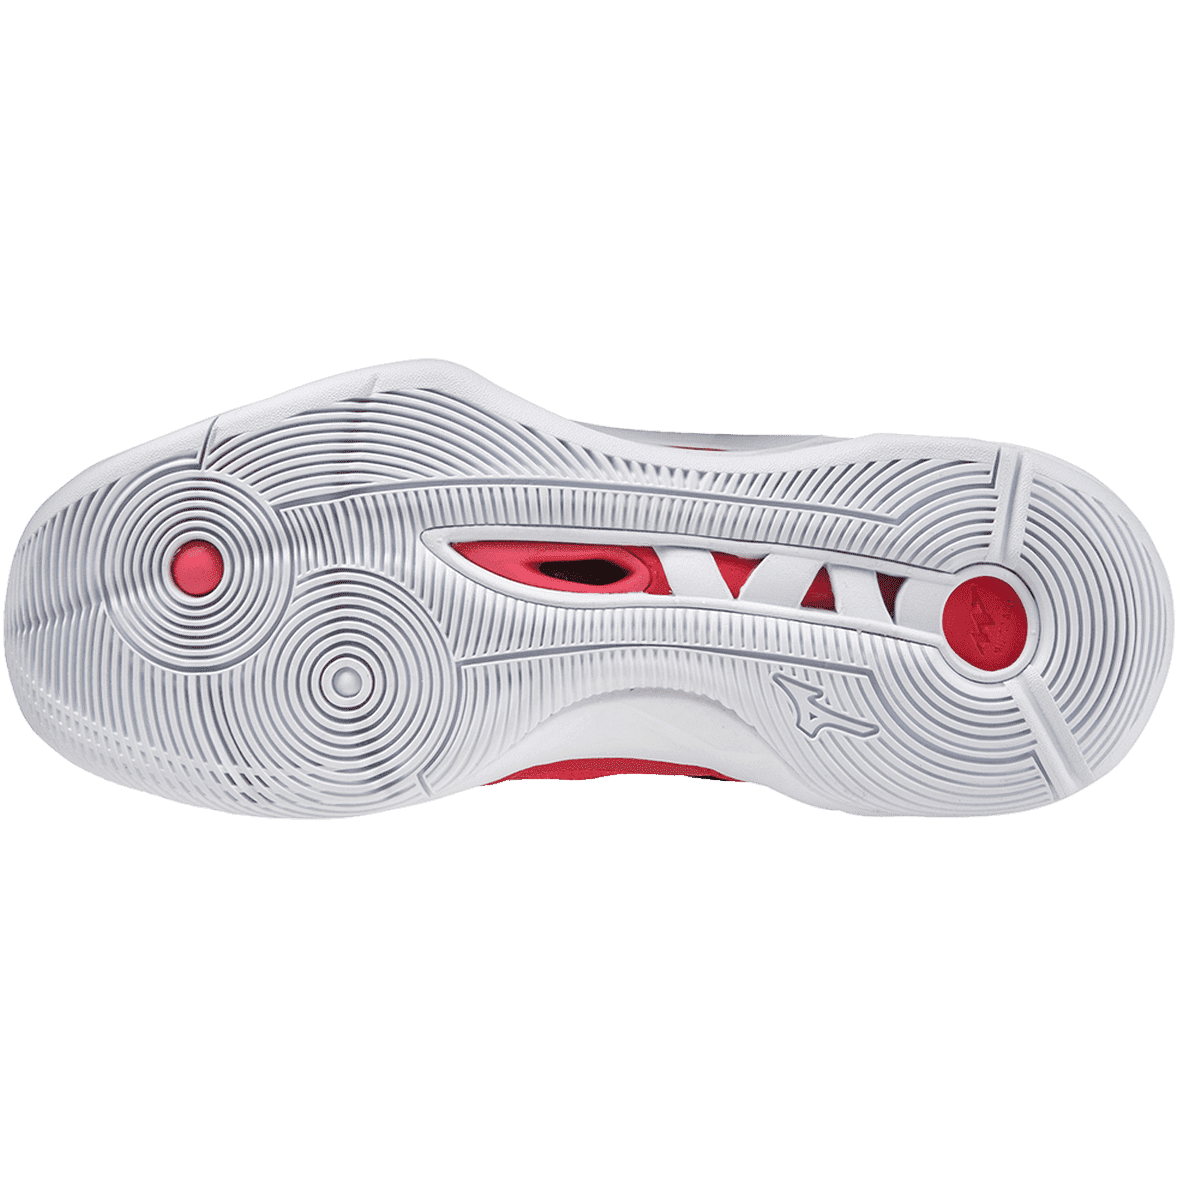 Mizuno Wave Momentum 2 Women's Volleyball Shoe - Red White - HIT a Double